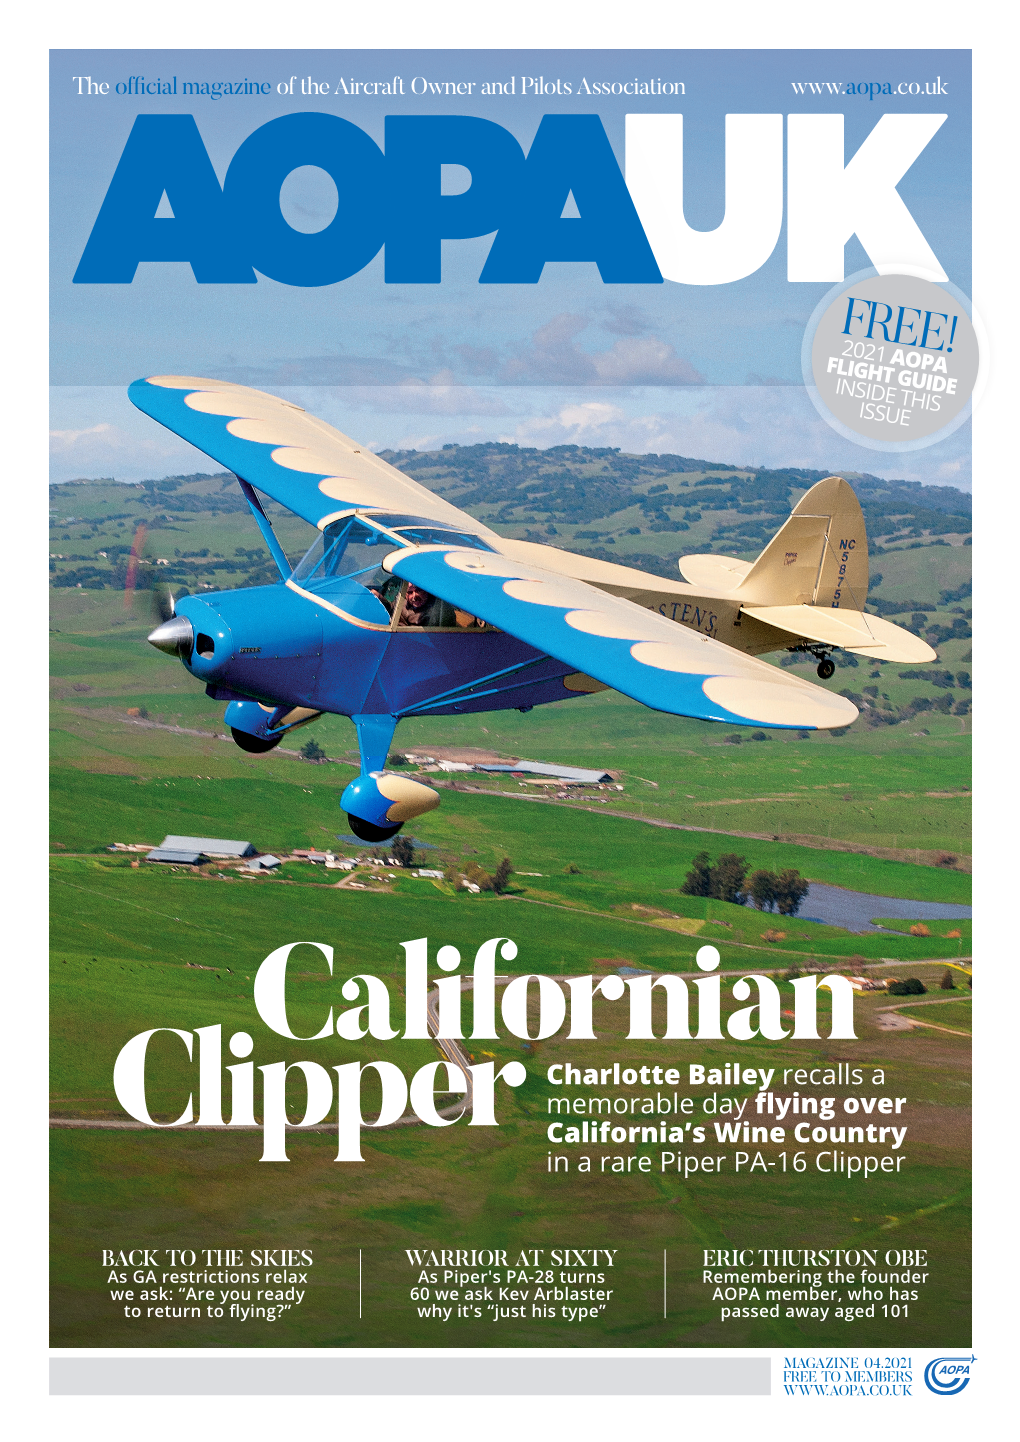 Charlotte Bailey Recalls a Memorable Day Flying Over Clipper California’S Wine Country in a Rare Piper PA-16 Clipper